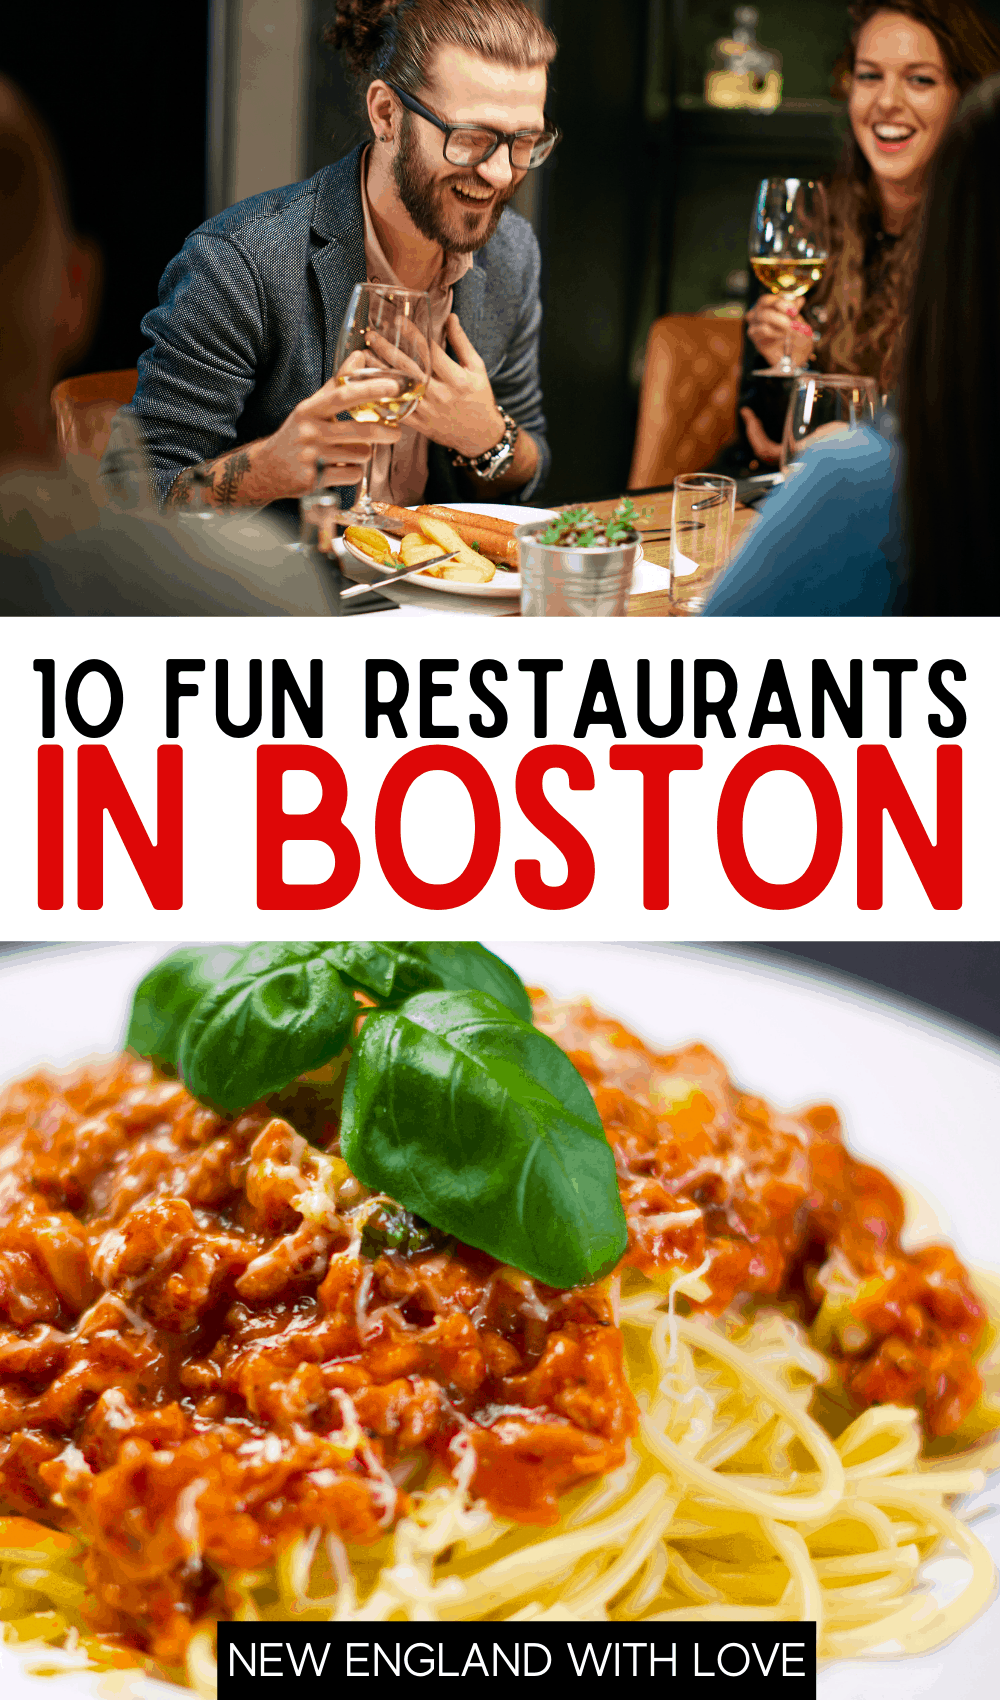 Pinterest graphic reading "10 Fun Restaurants in Boston" with a closeup of food on a plate